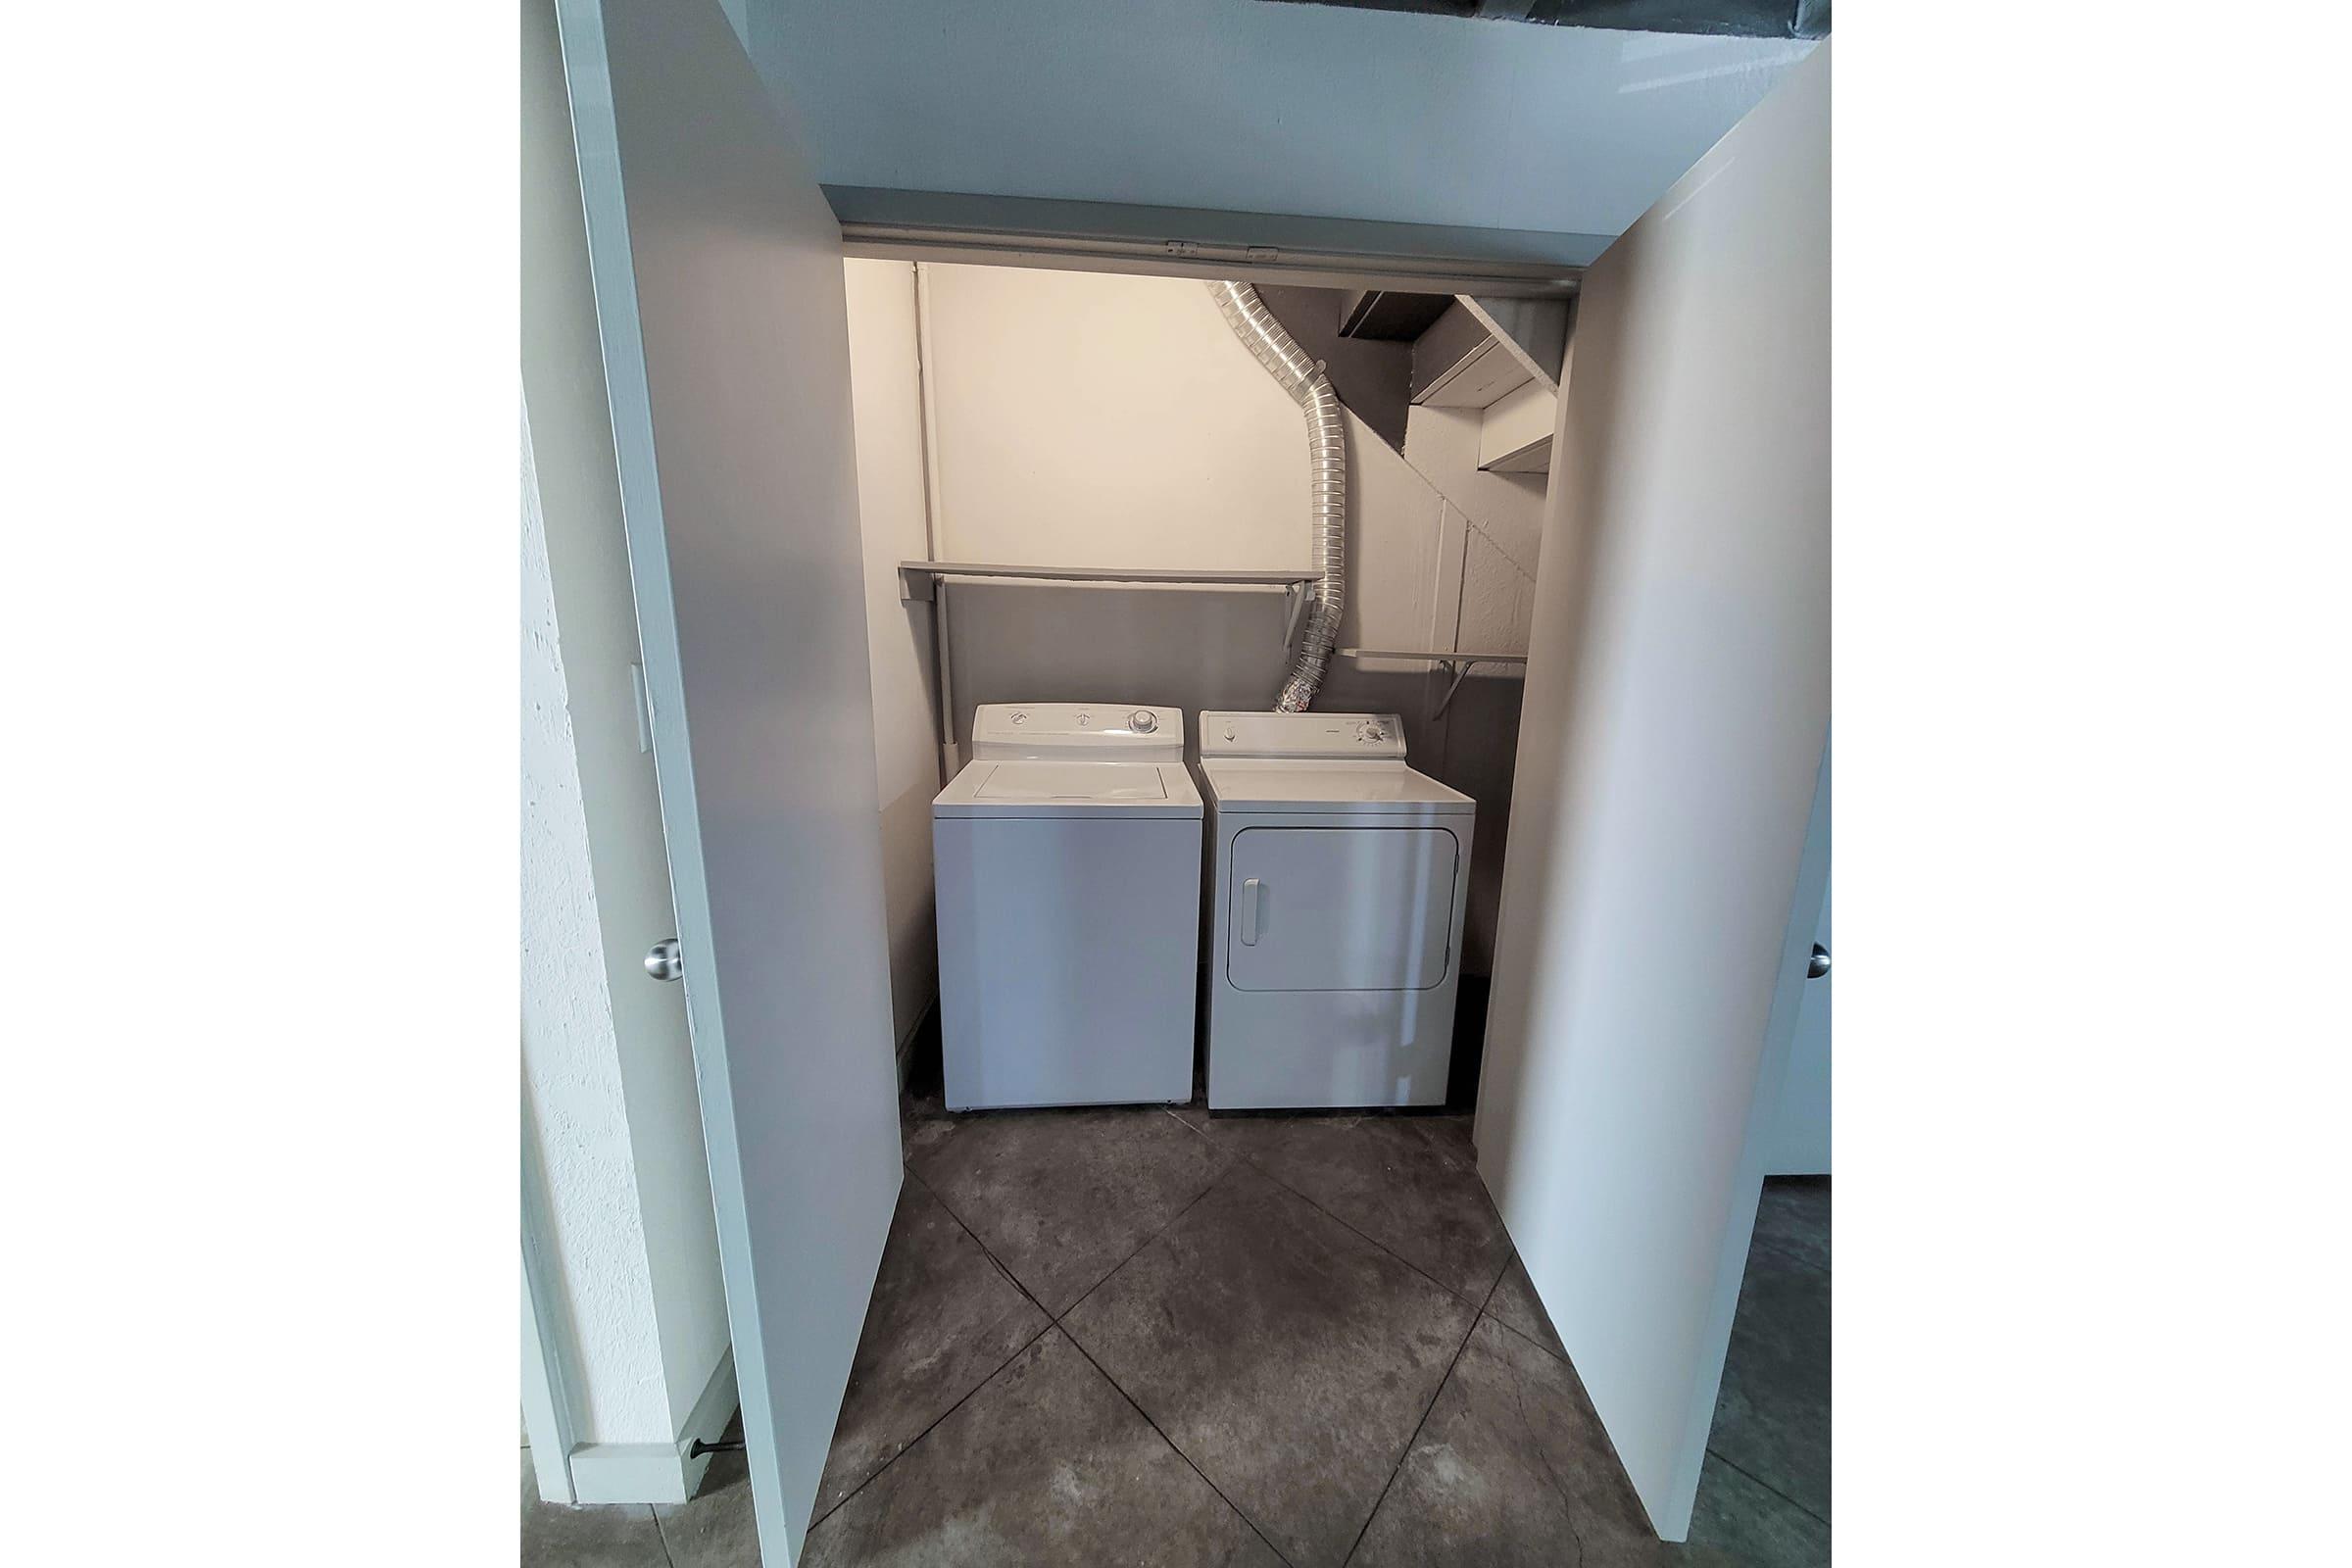 a refrigerator in a small room